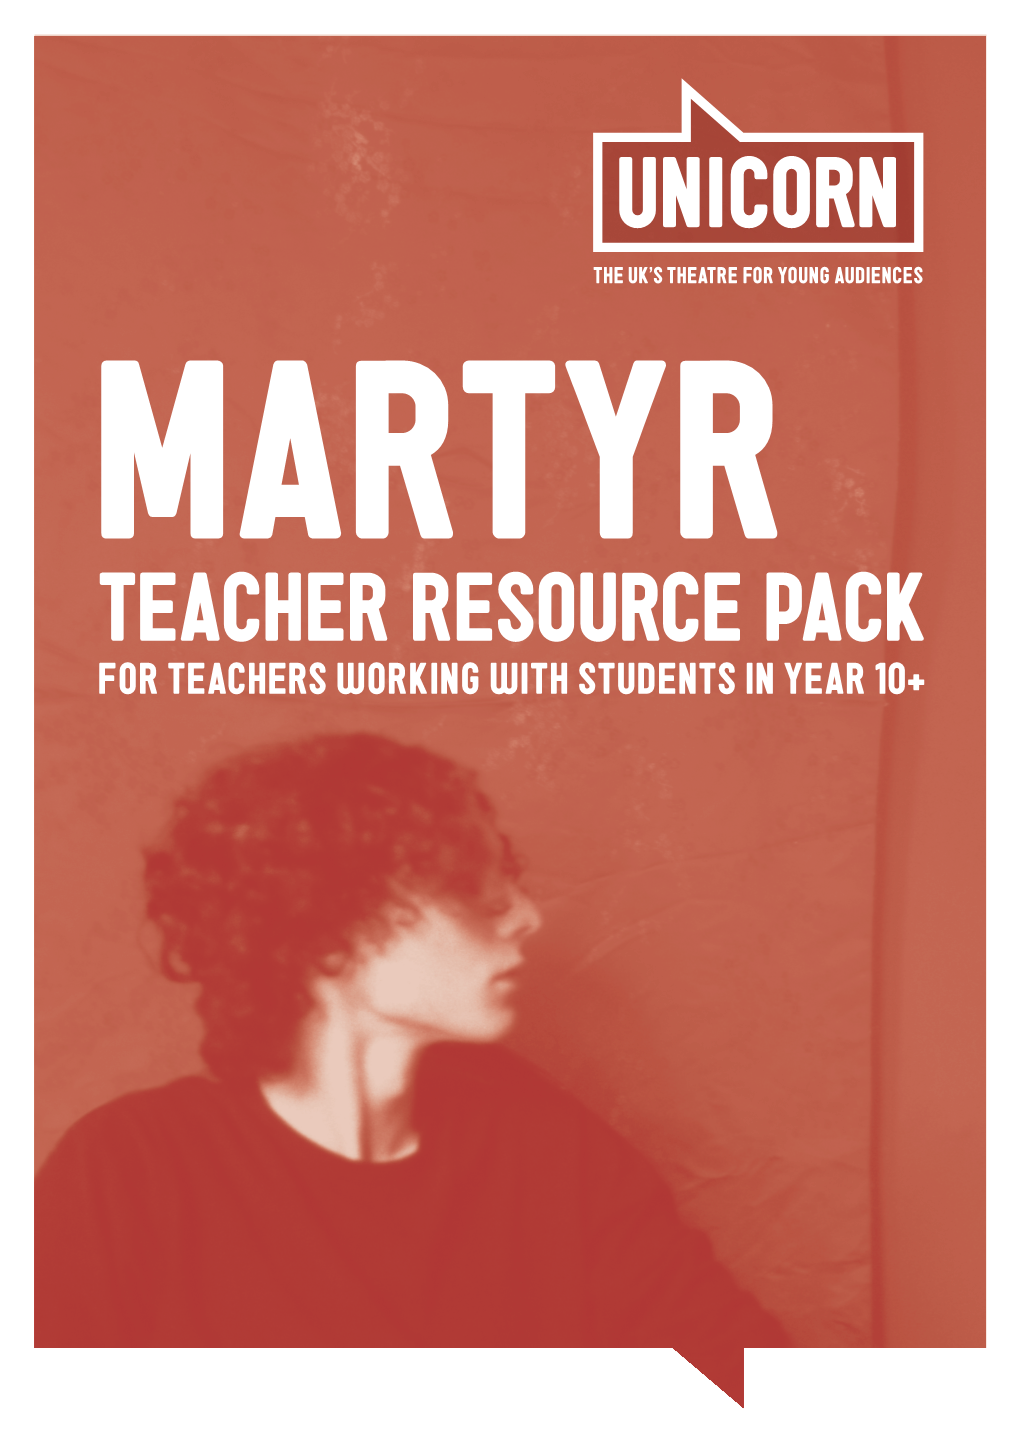 Teacher Resource Pack for Teachers Working with Students in Year 10+ Martyr from 15 Sep - 10 Oct 2015 for Students in Year 10 and Up